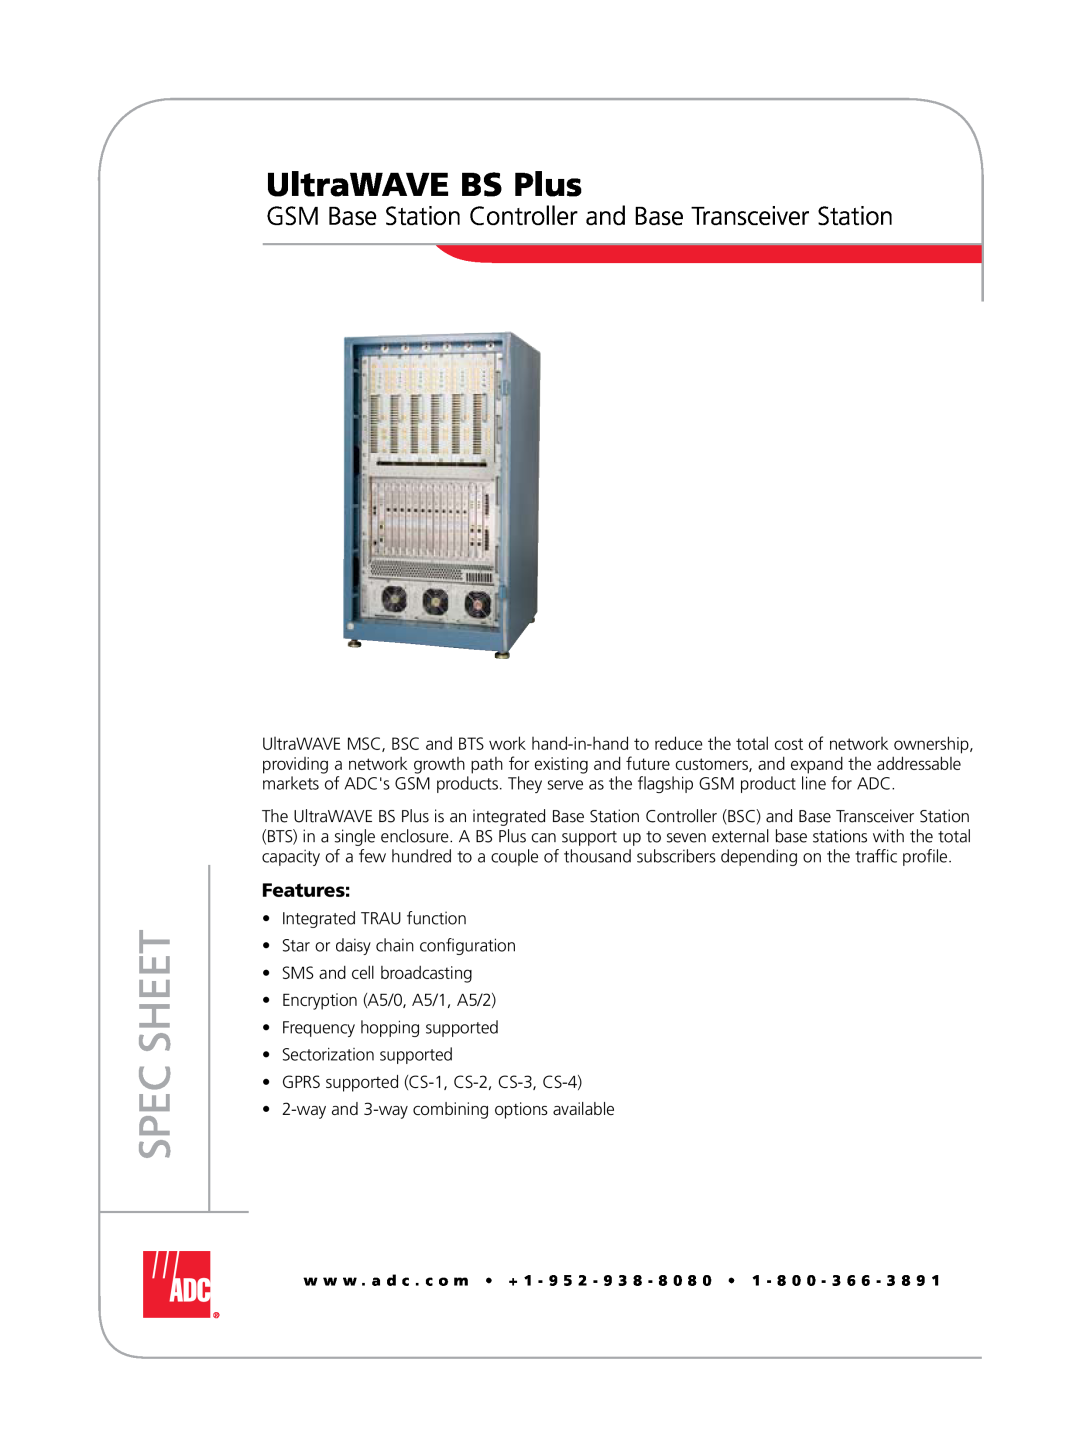 ADC manual UltraWAVE BS Plus, GSM Base Station Controller and Base Transceiver Station, Spec Sheet, Features 